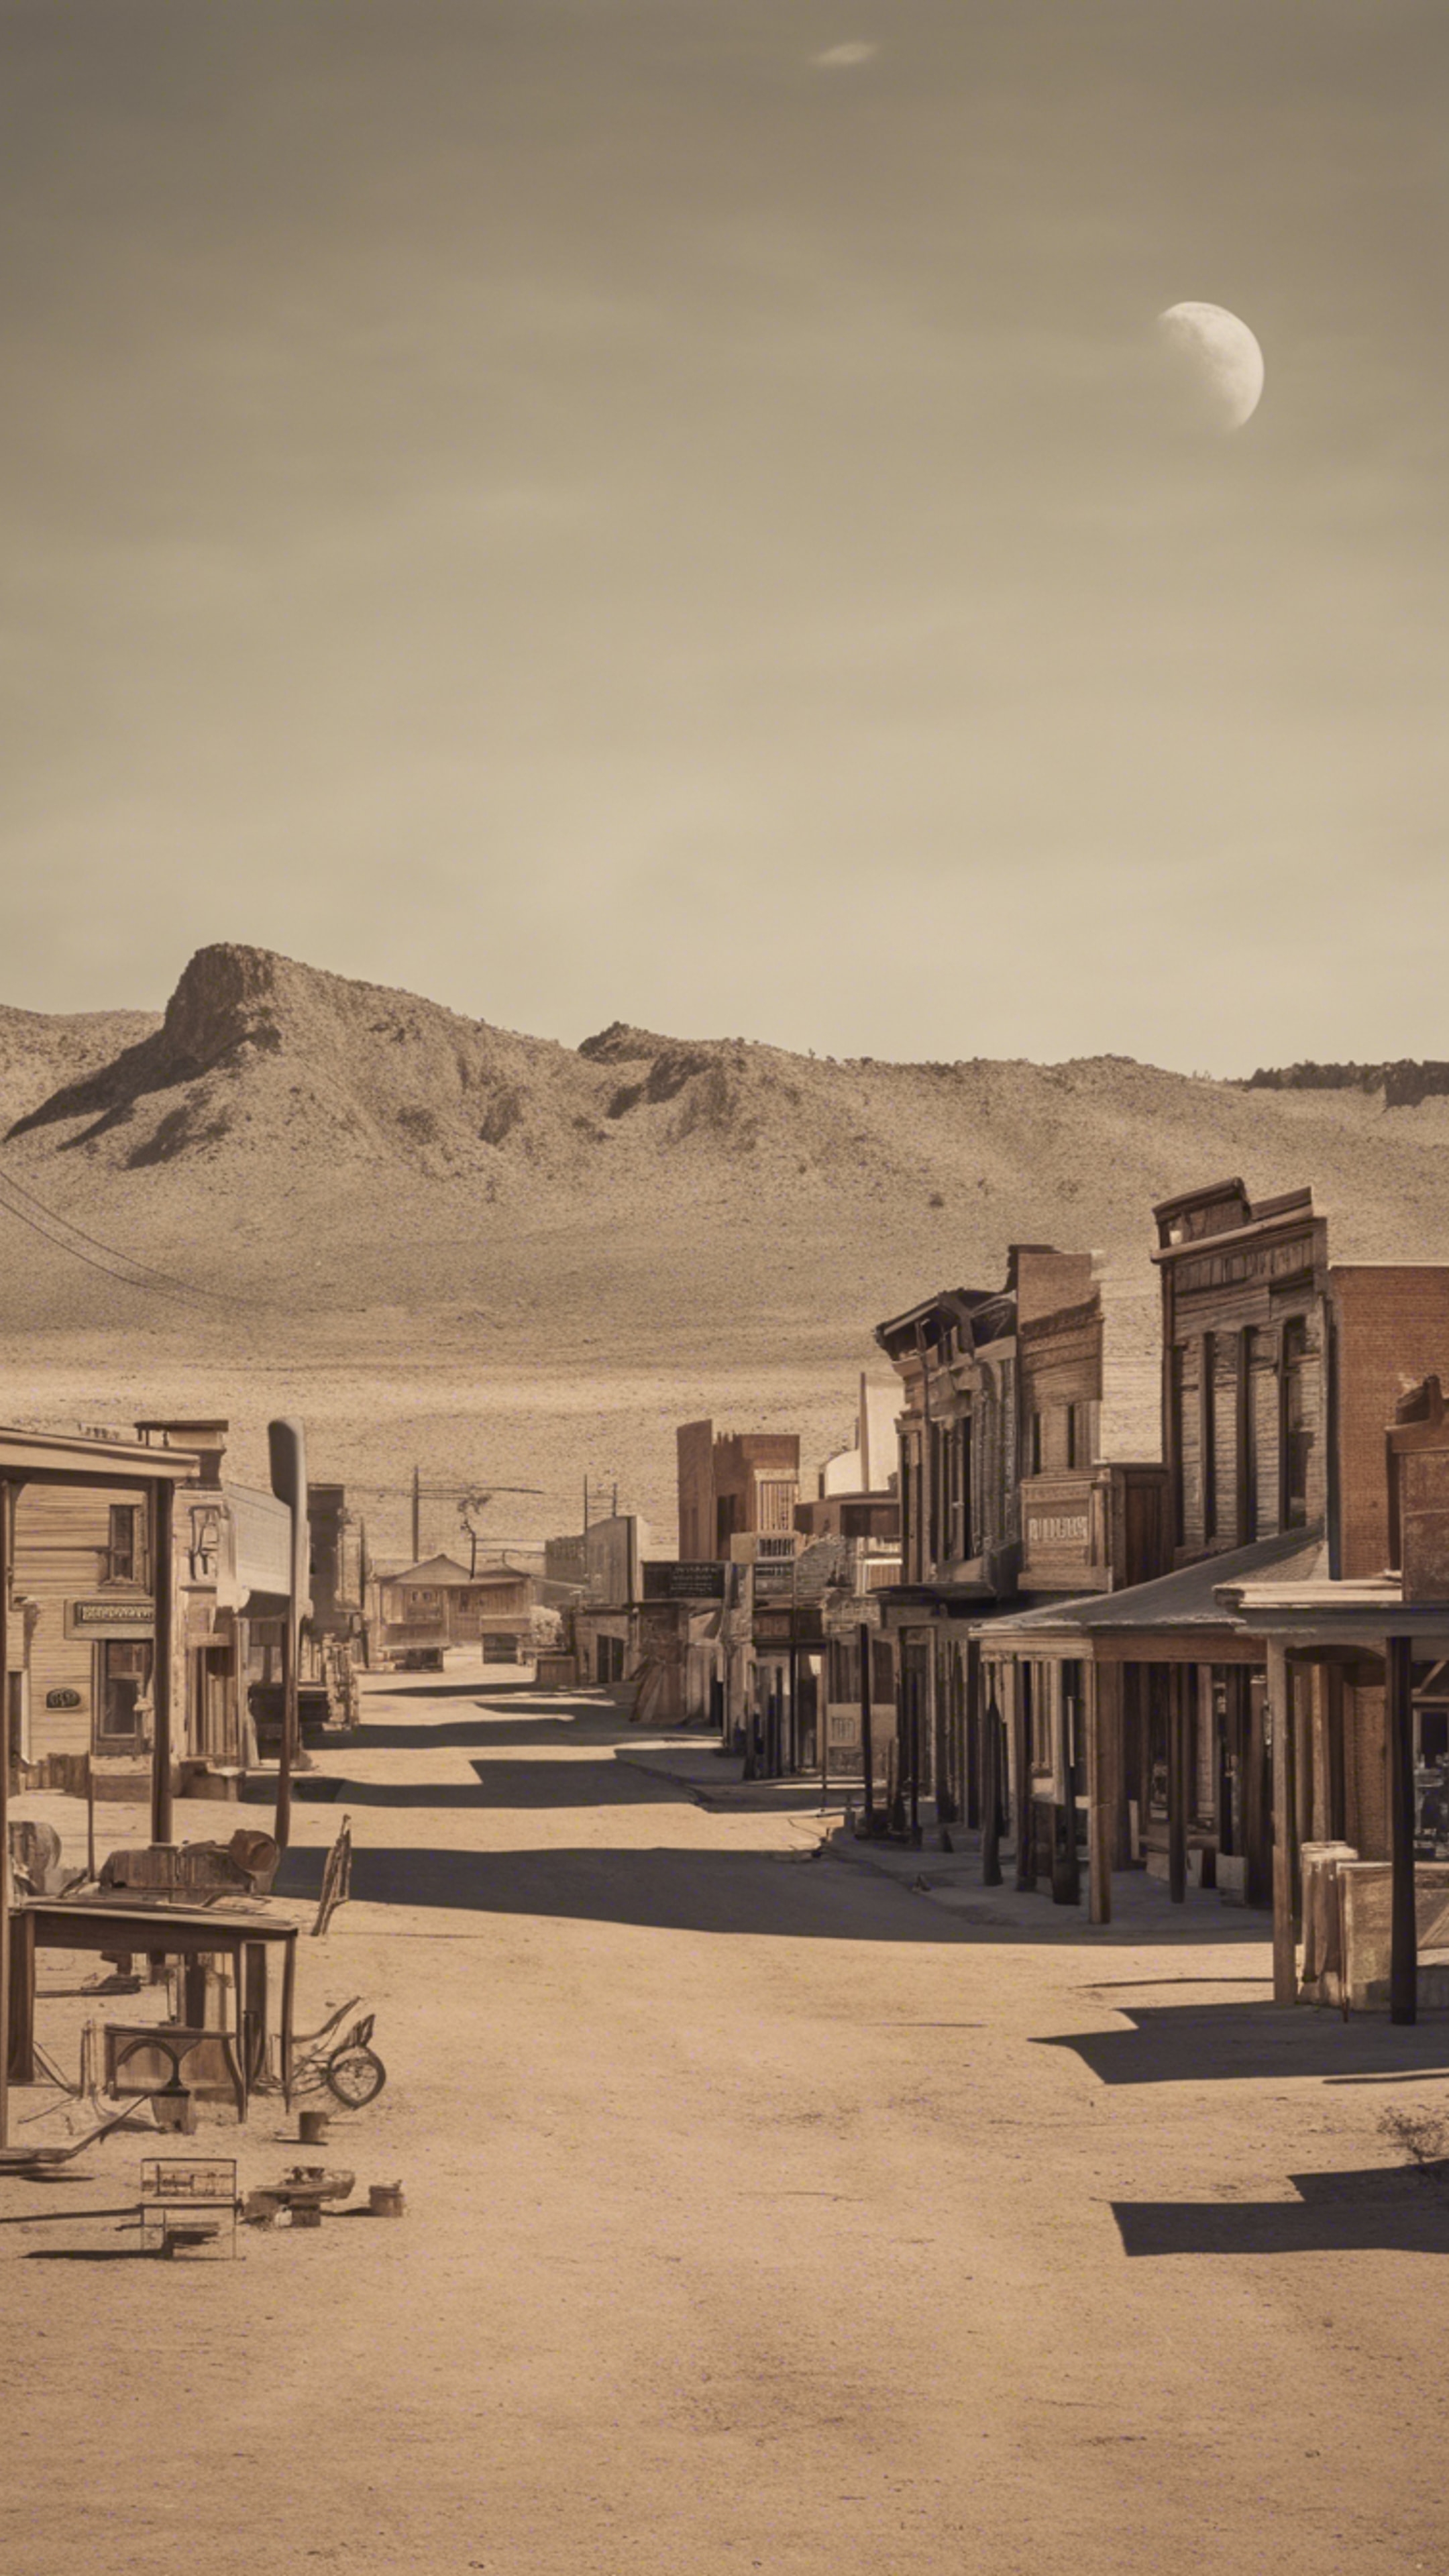 A nostalgic portrayal of a deserted old western town skyline at high noon. Tapéta[6f3773f399464a7985e4]